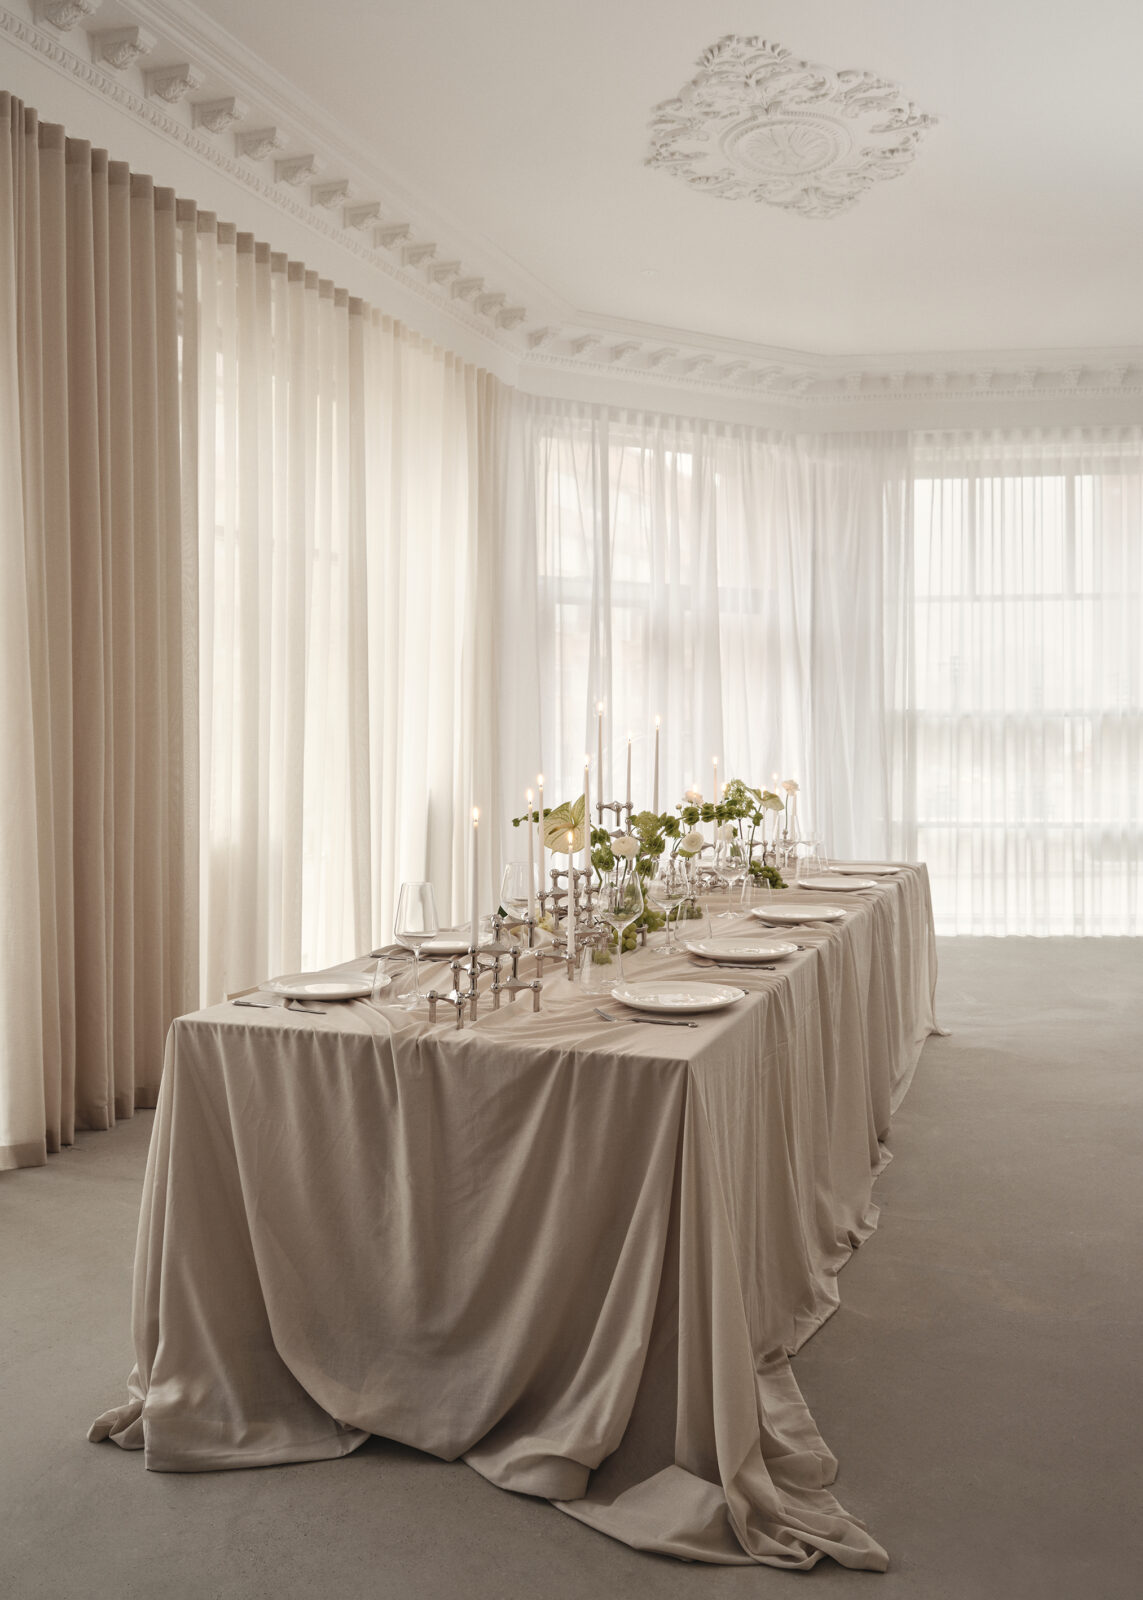 stoff nagel wedding table with chrome candelabras